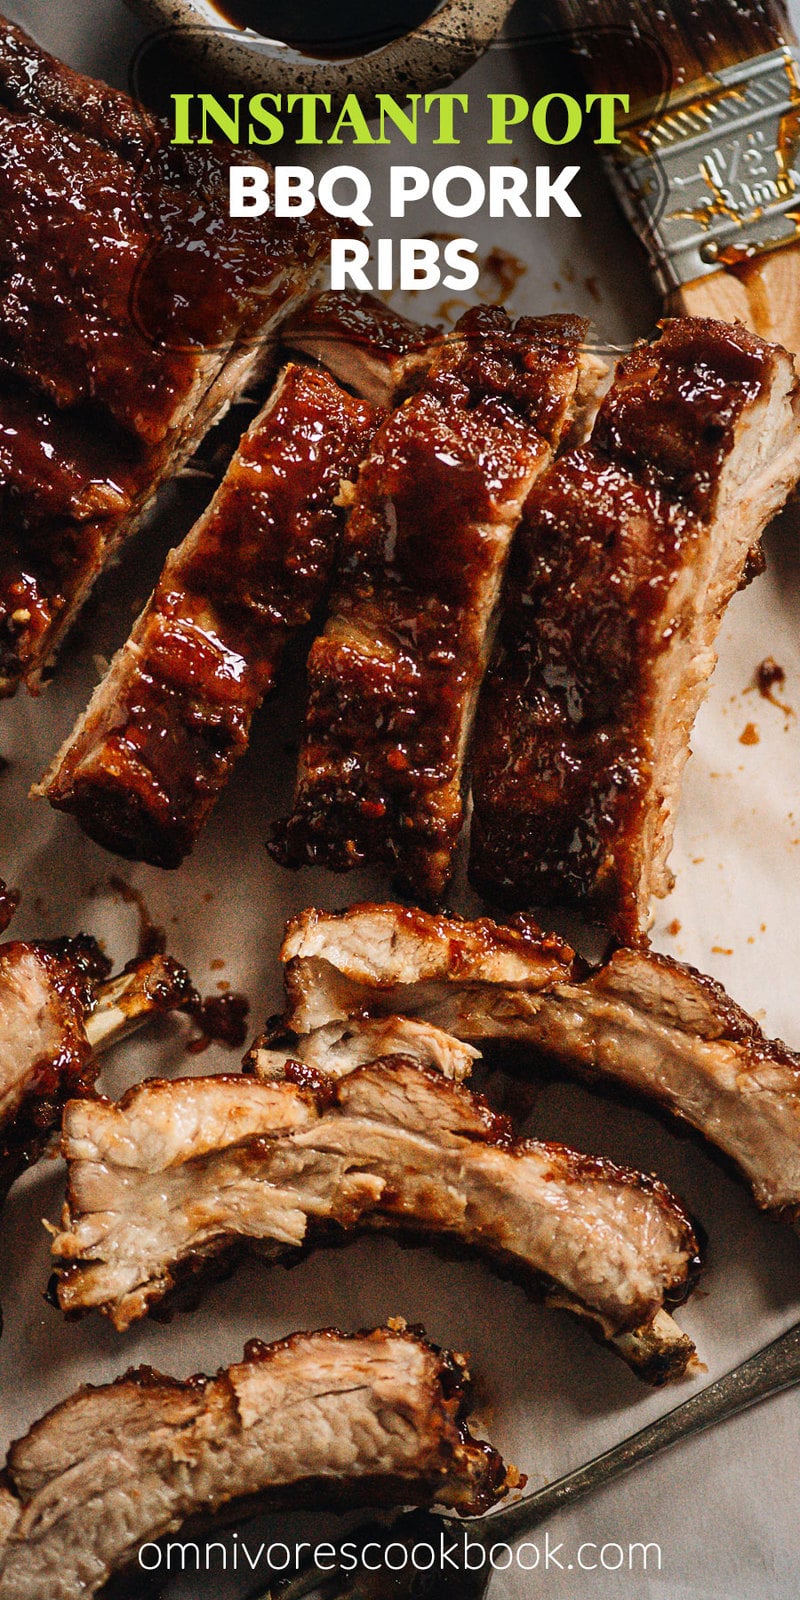 Instant Pot Pork Ribs (Chinese-Style) - A super easy Instant Pot pork ribs recipe that produces juicy tender pork with a sticky glossy glaze just like real-deal barbeque pork. It takes merely 10 minutes to set up, and your dinner will be done in 30 minutes. An Asian style dry rub and BBQ sauce are included, but you can use your own favorite seasonings in this recipe as well. {Gluten-Free}